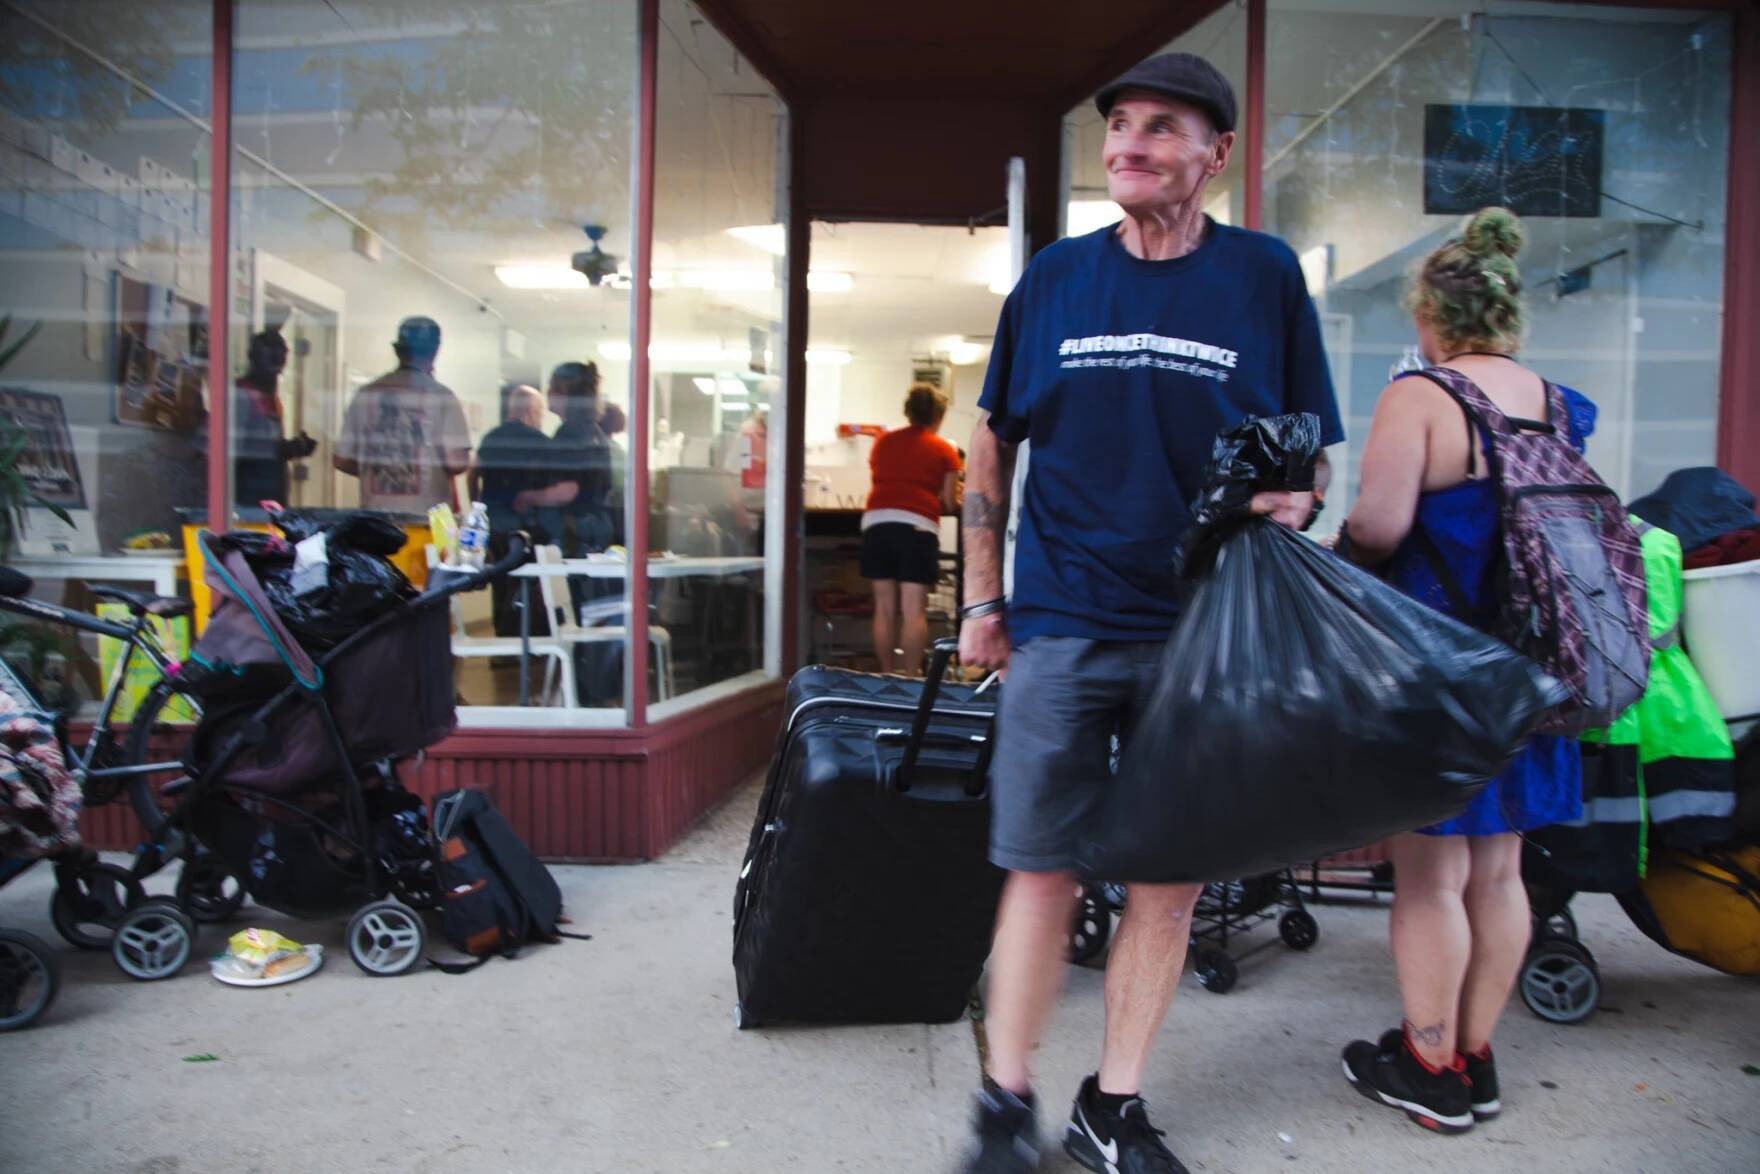 Dean Chambers leaves the laundromat with a suitcase full of clean clothes. It took him a few loads but he is thankful he didn’t have to pay for it, since he couldn't afford it otherwise. A washing and drying load can cost between $3.50 and $5. (Gabriela Lozada/NHPR)